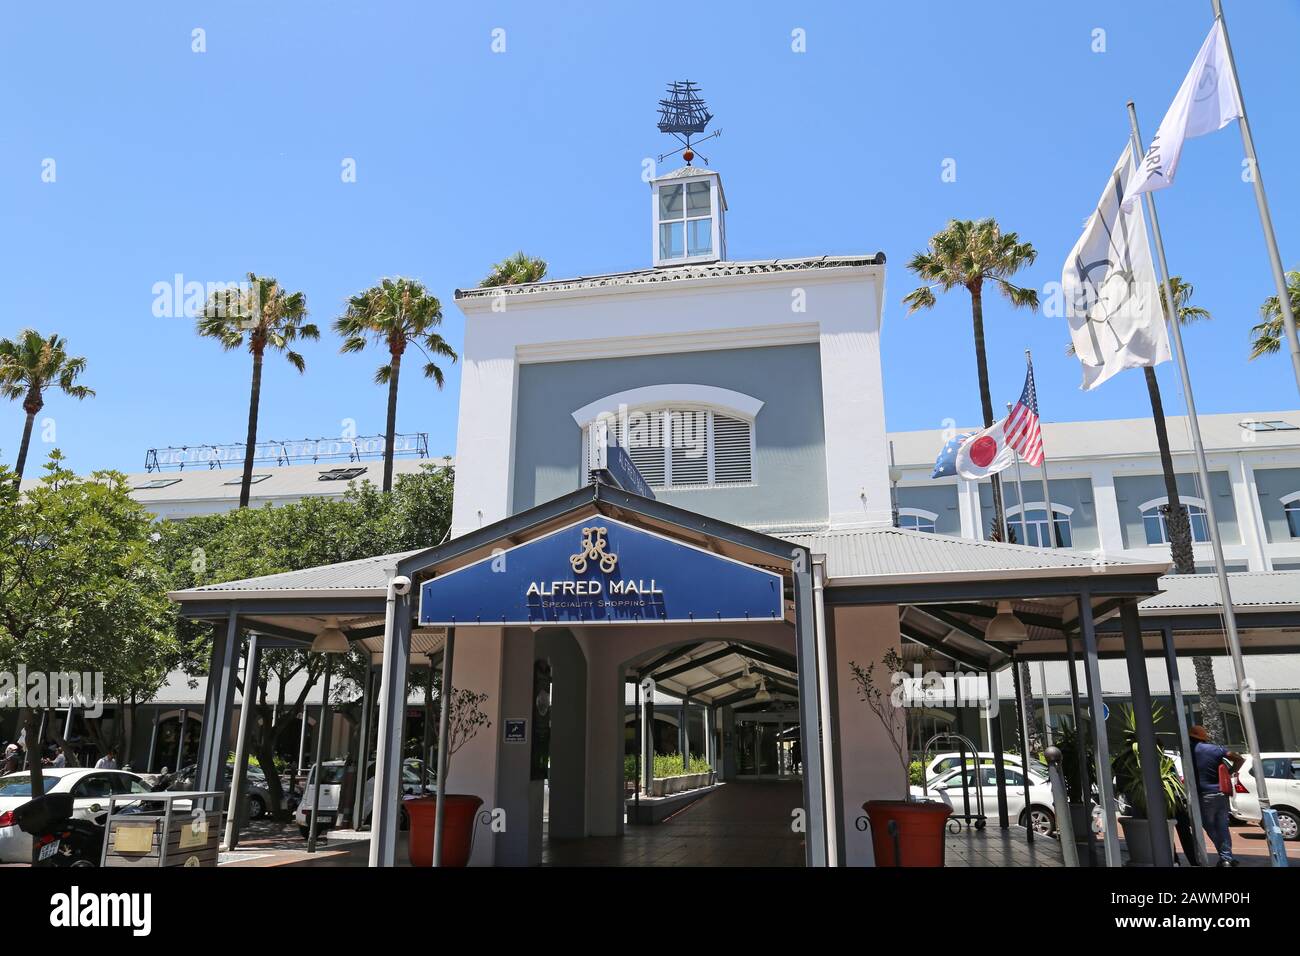 Alfred Mall and Hotel, V&A (Victoria and Alfred) Waterfront, Cape Town, Table Bay, Western Cape Province, South Africa, Africa Stock Photo